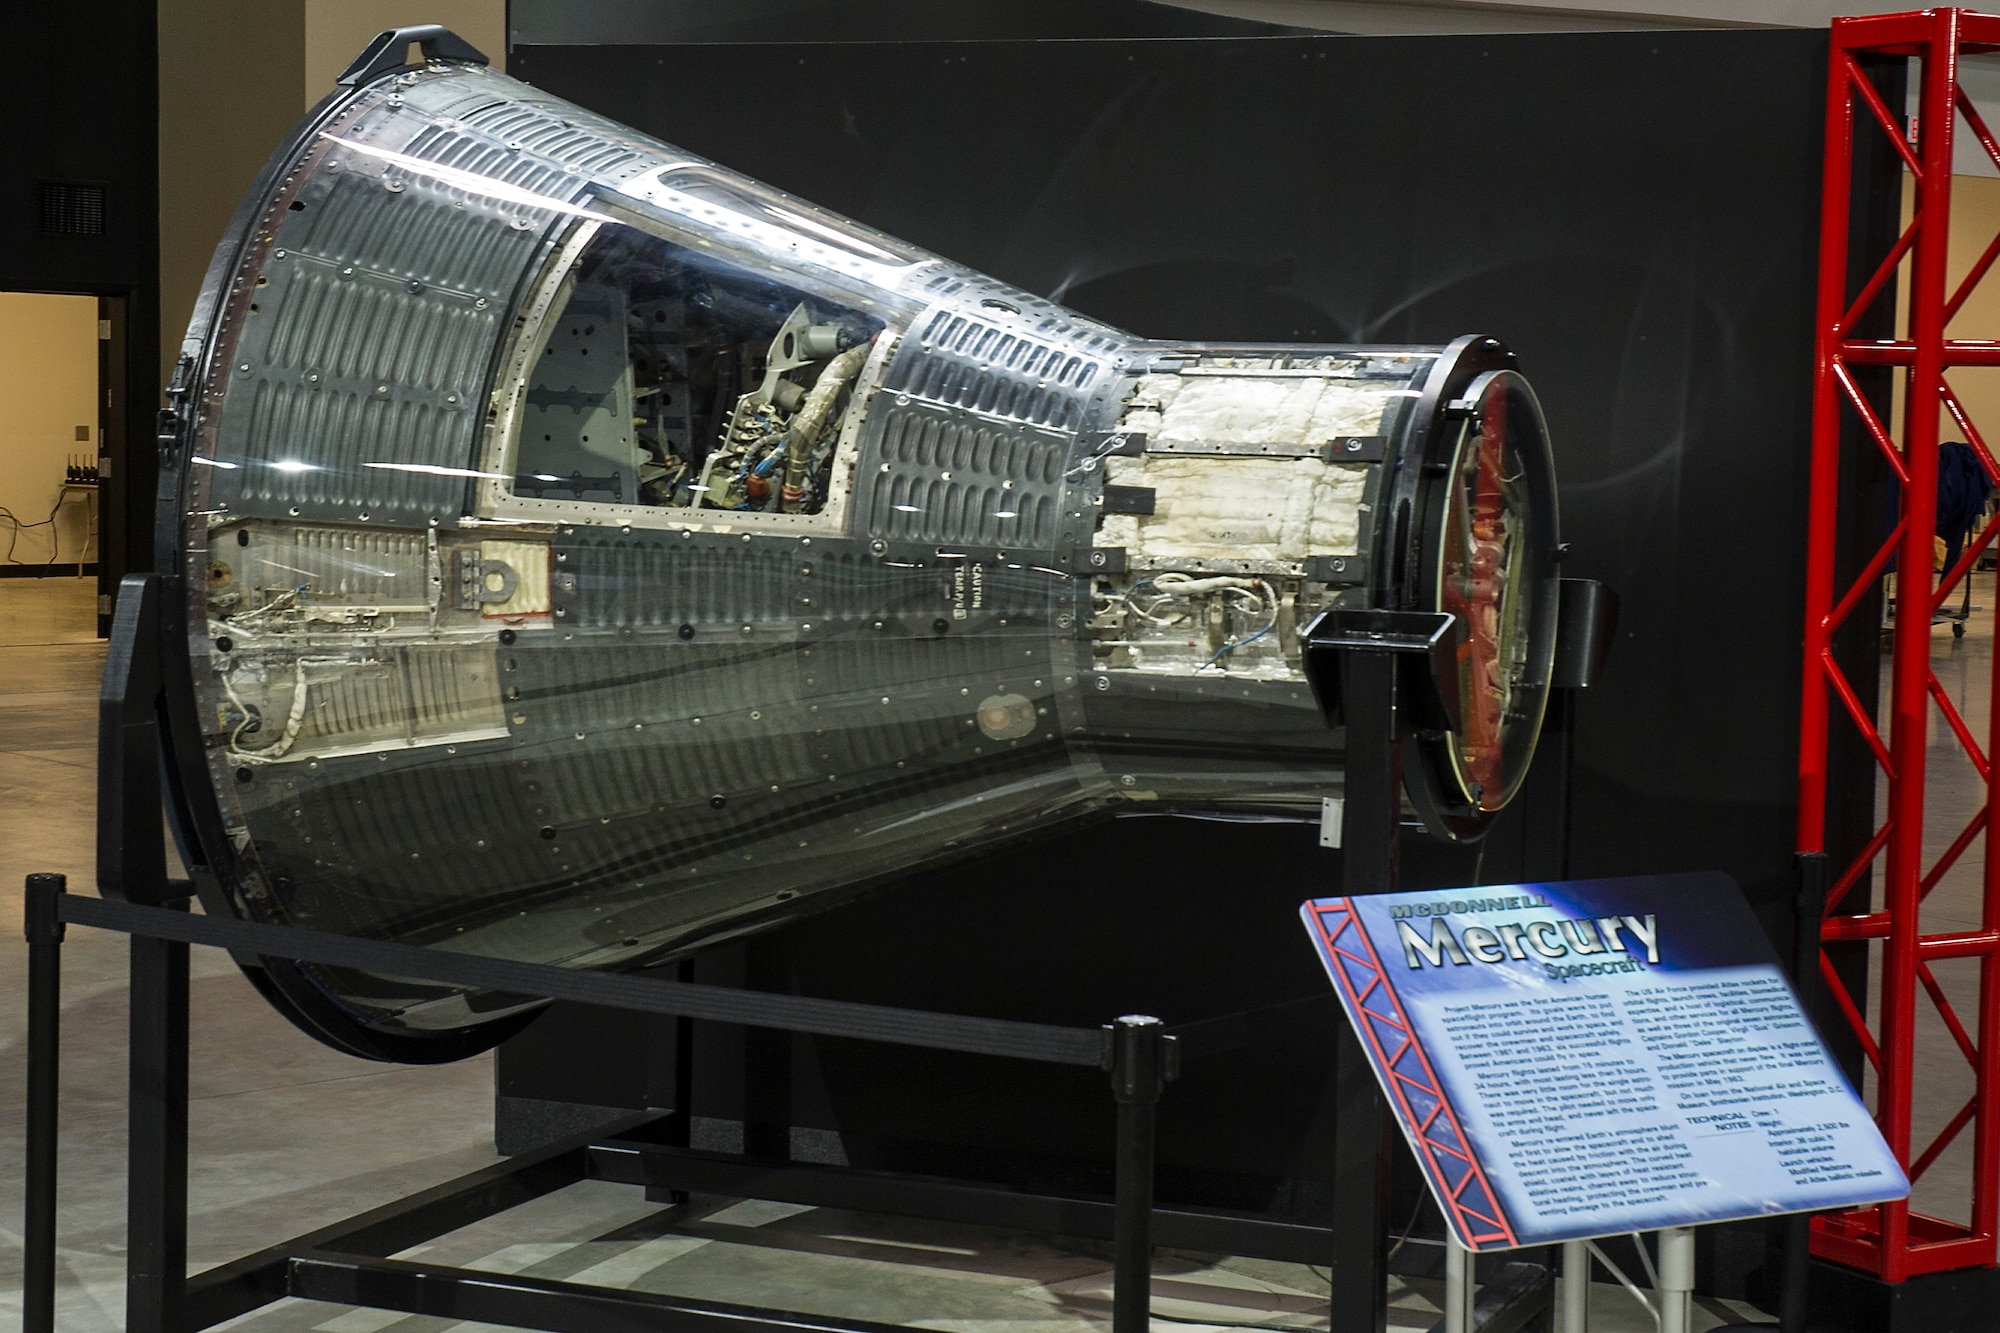 DAYTON, Ohio -- Mercury spacecraft in the Space Gallery at the National Museum of the United States Air Force. (U.S. Air Force photo)
